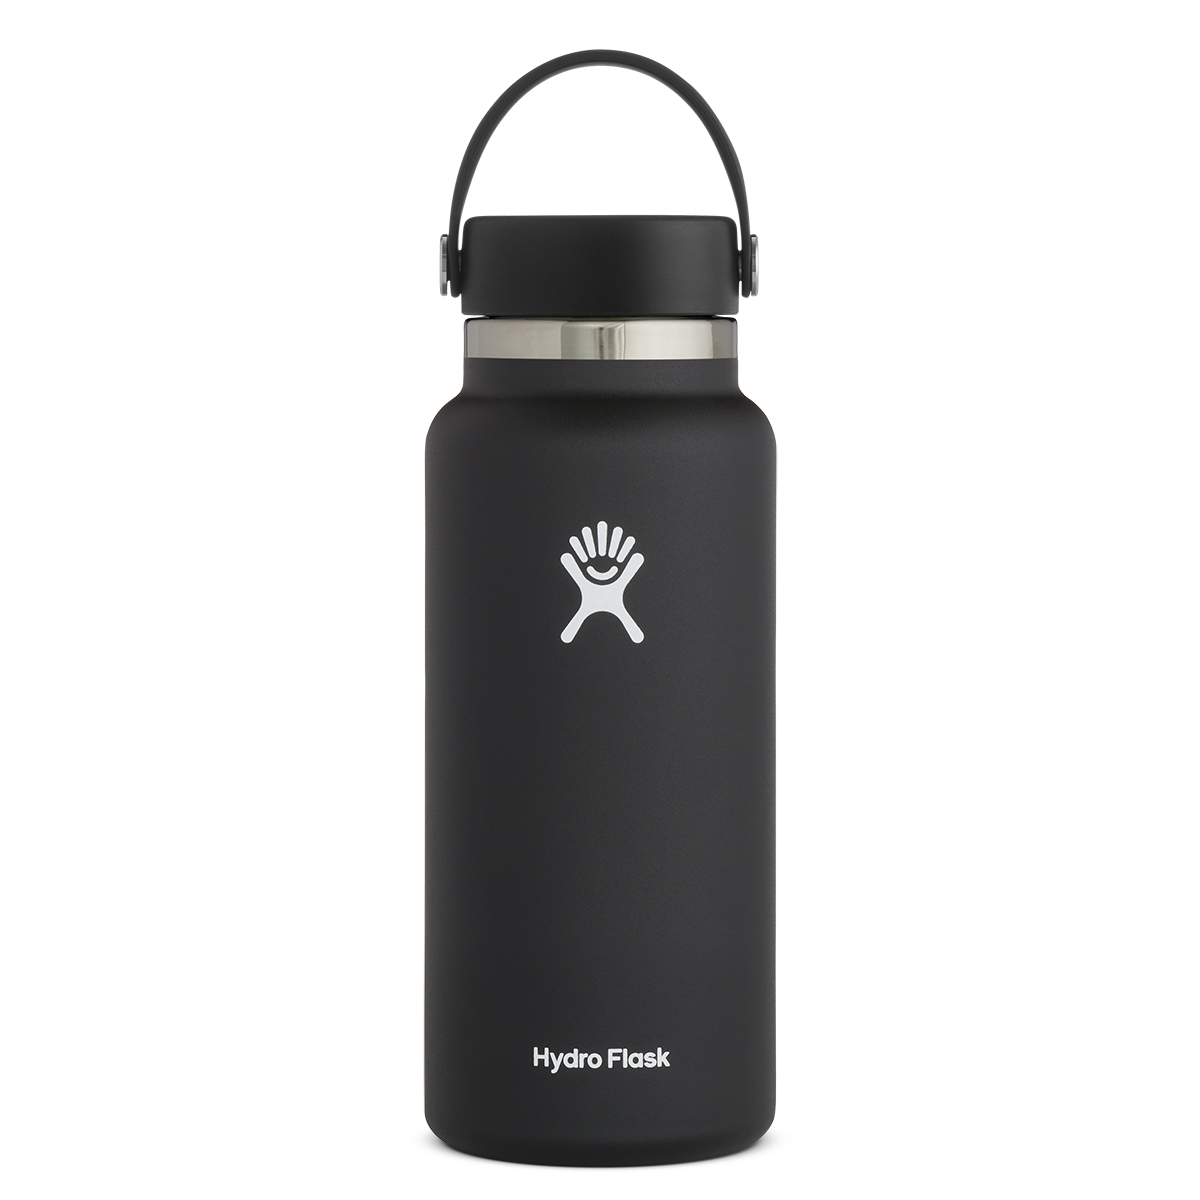 https://www.containerstore.com/catalogimages/384434/10080420-WideMouthHydroFlask.jpg